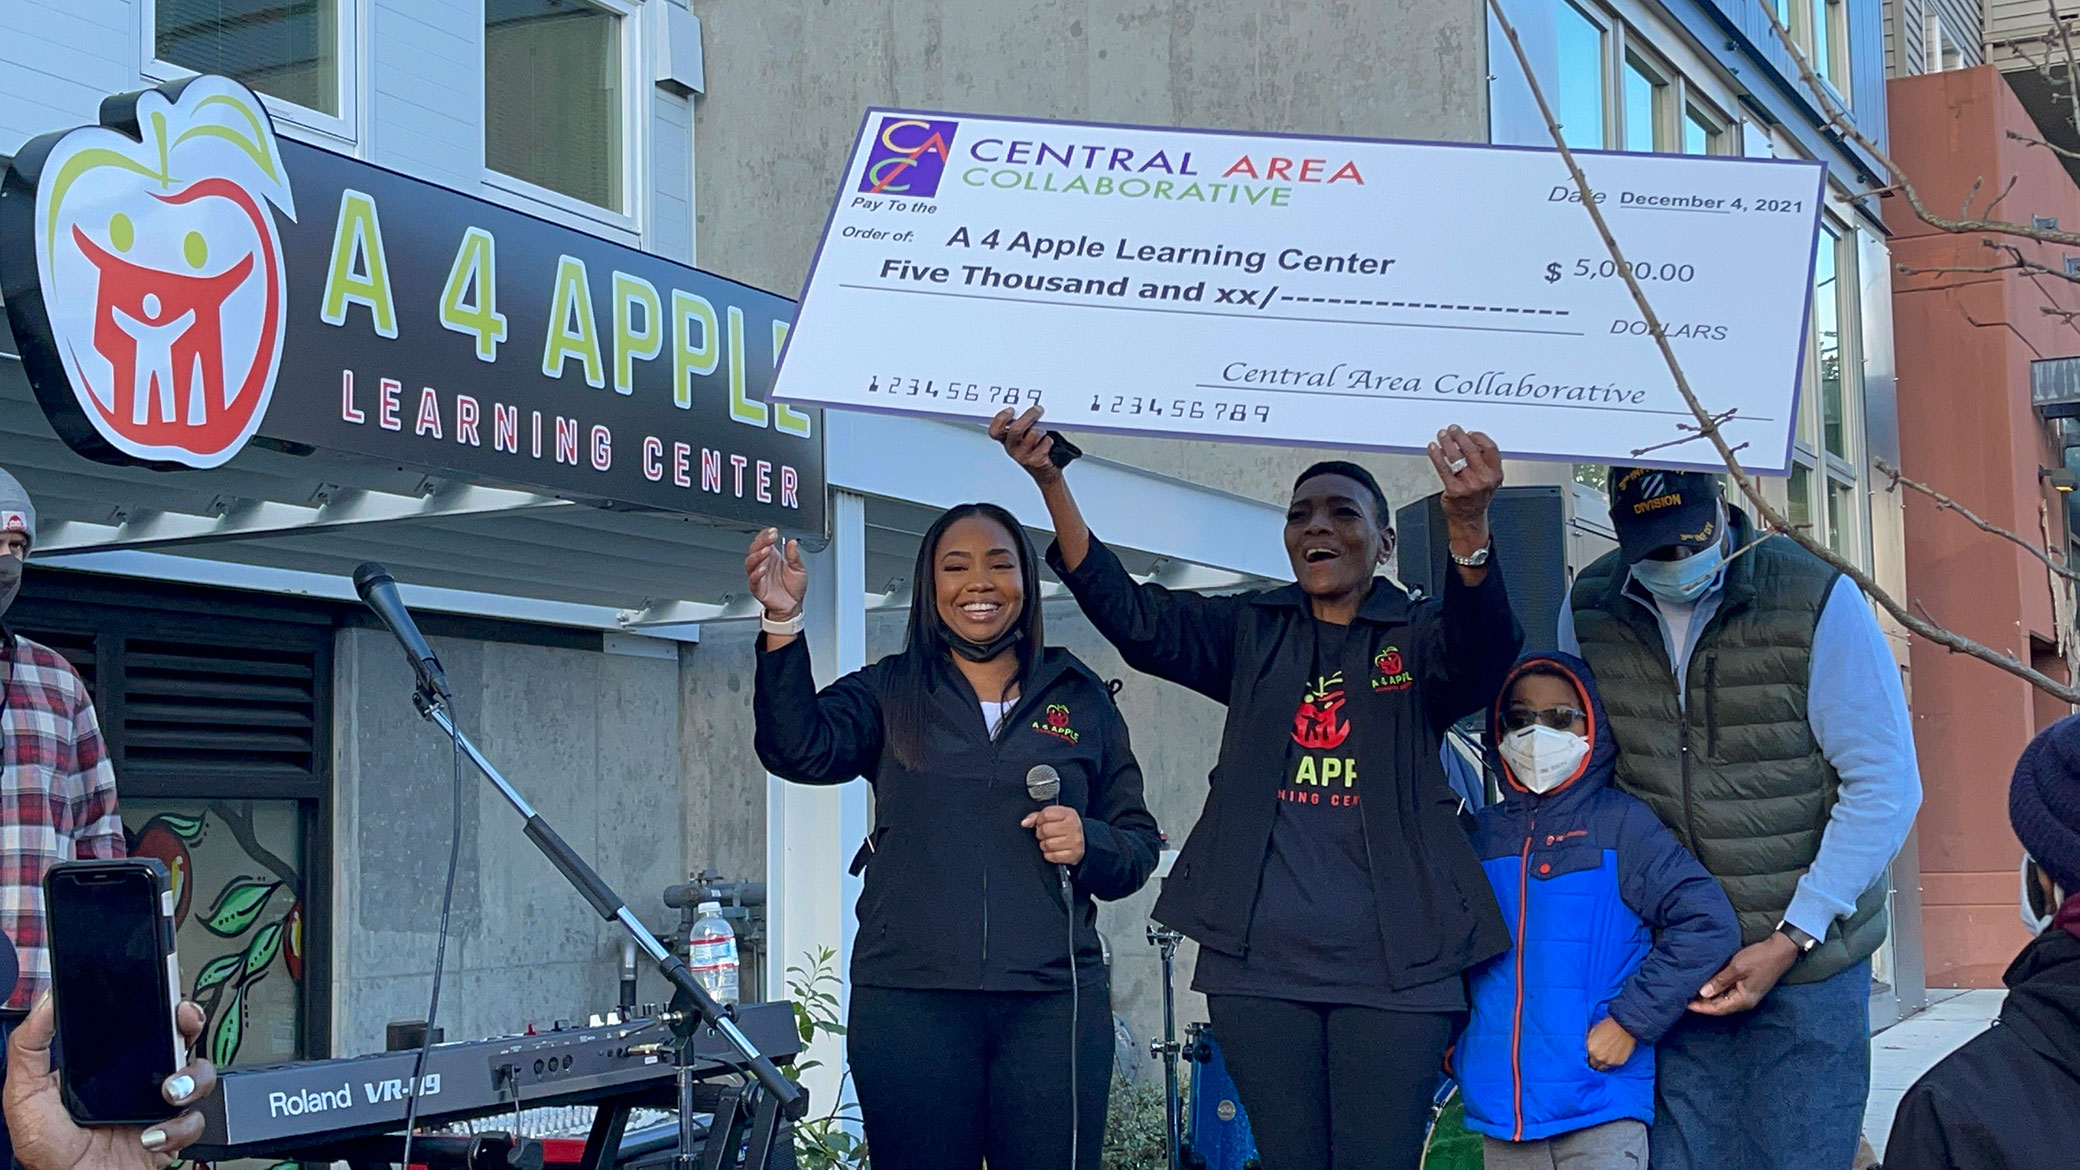 Appollonia Washington, Deborah B. Coleman, and Family are holding a $5000 check in front of their new location during their grand opening event.